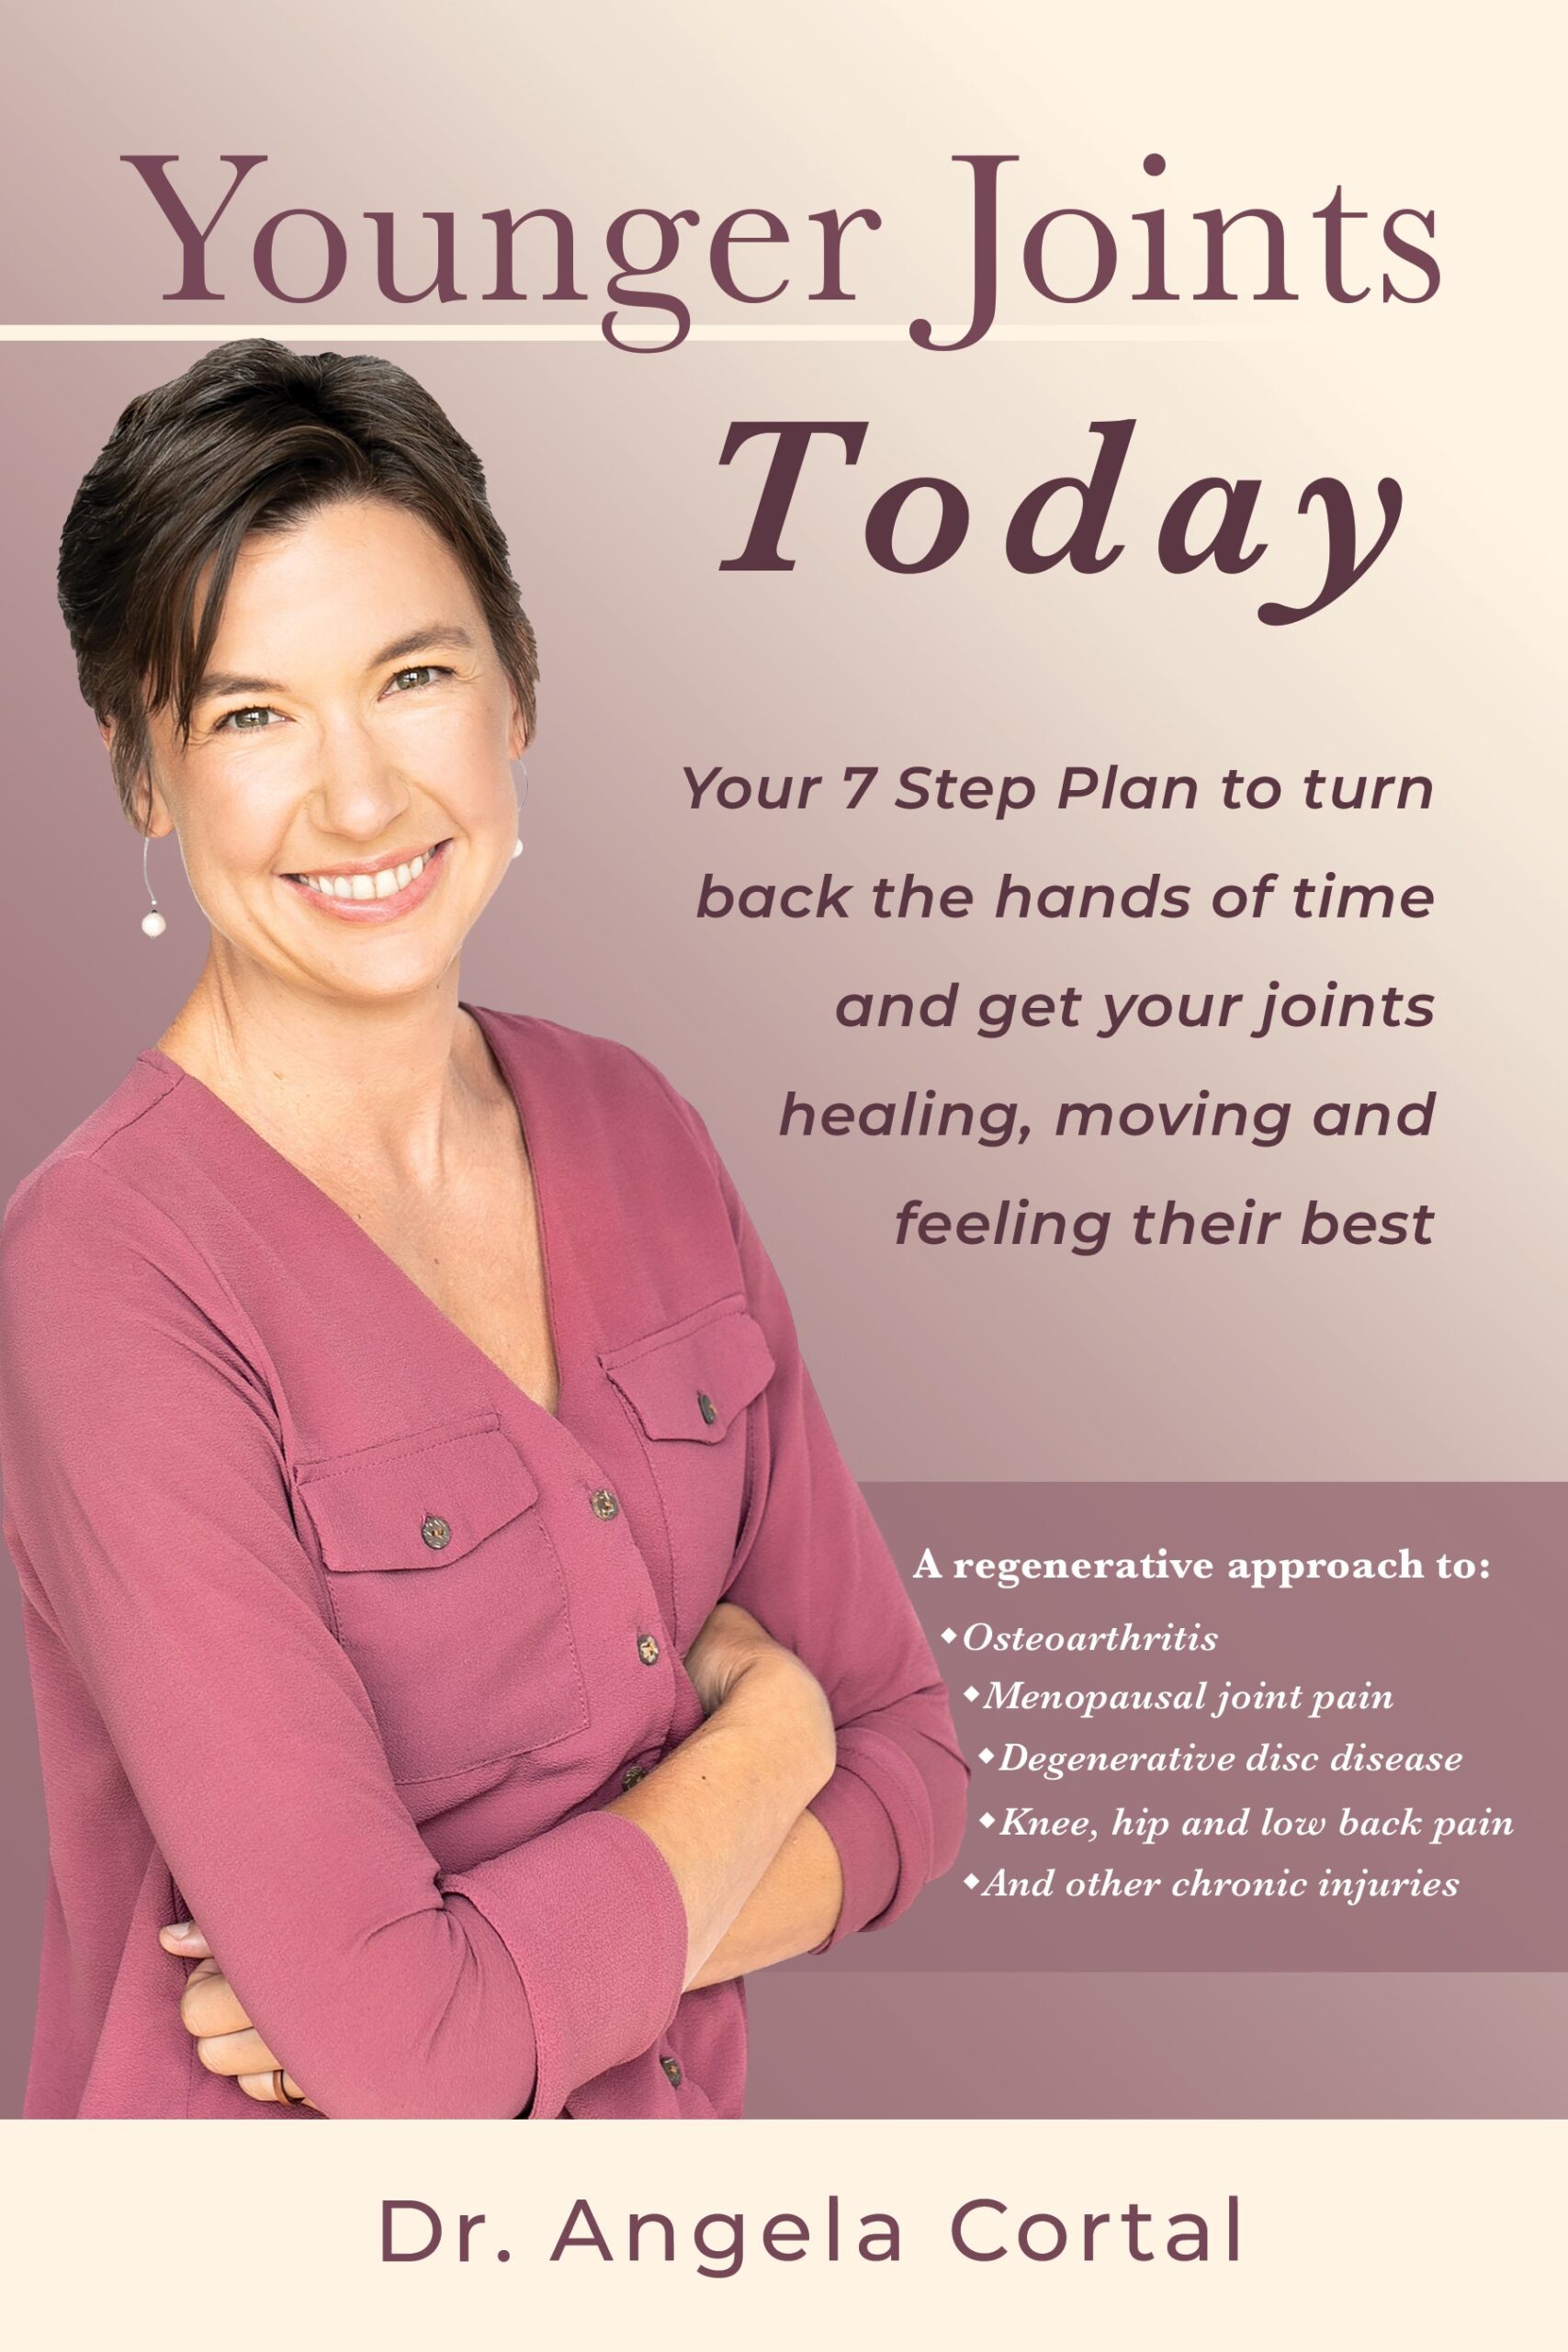 FREE: Younger Joints Today: Your 7 Step Plan to turn back the hands of time and get your joints healing, moving and feeling their best by Dr. Angela Cortal